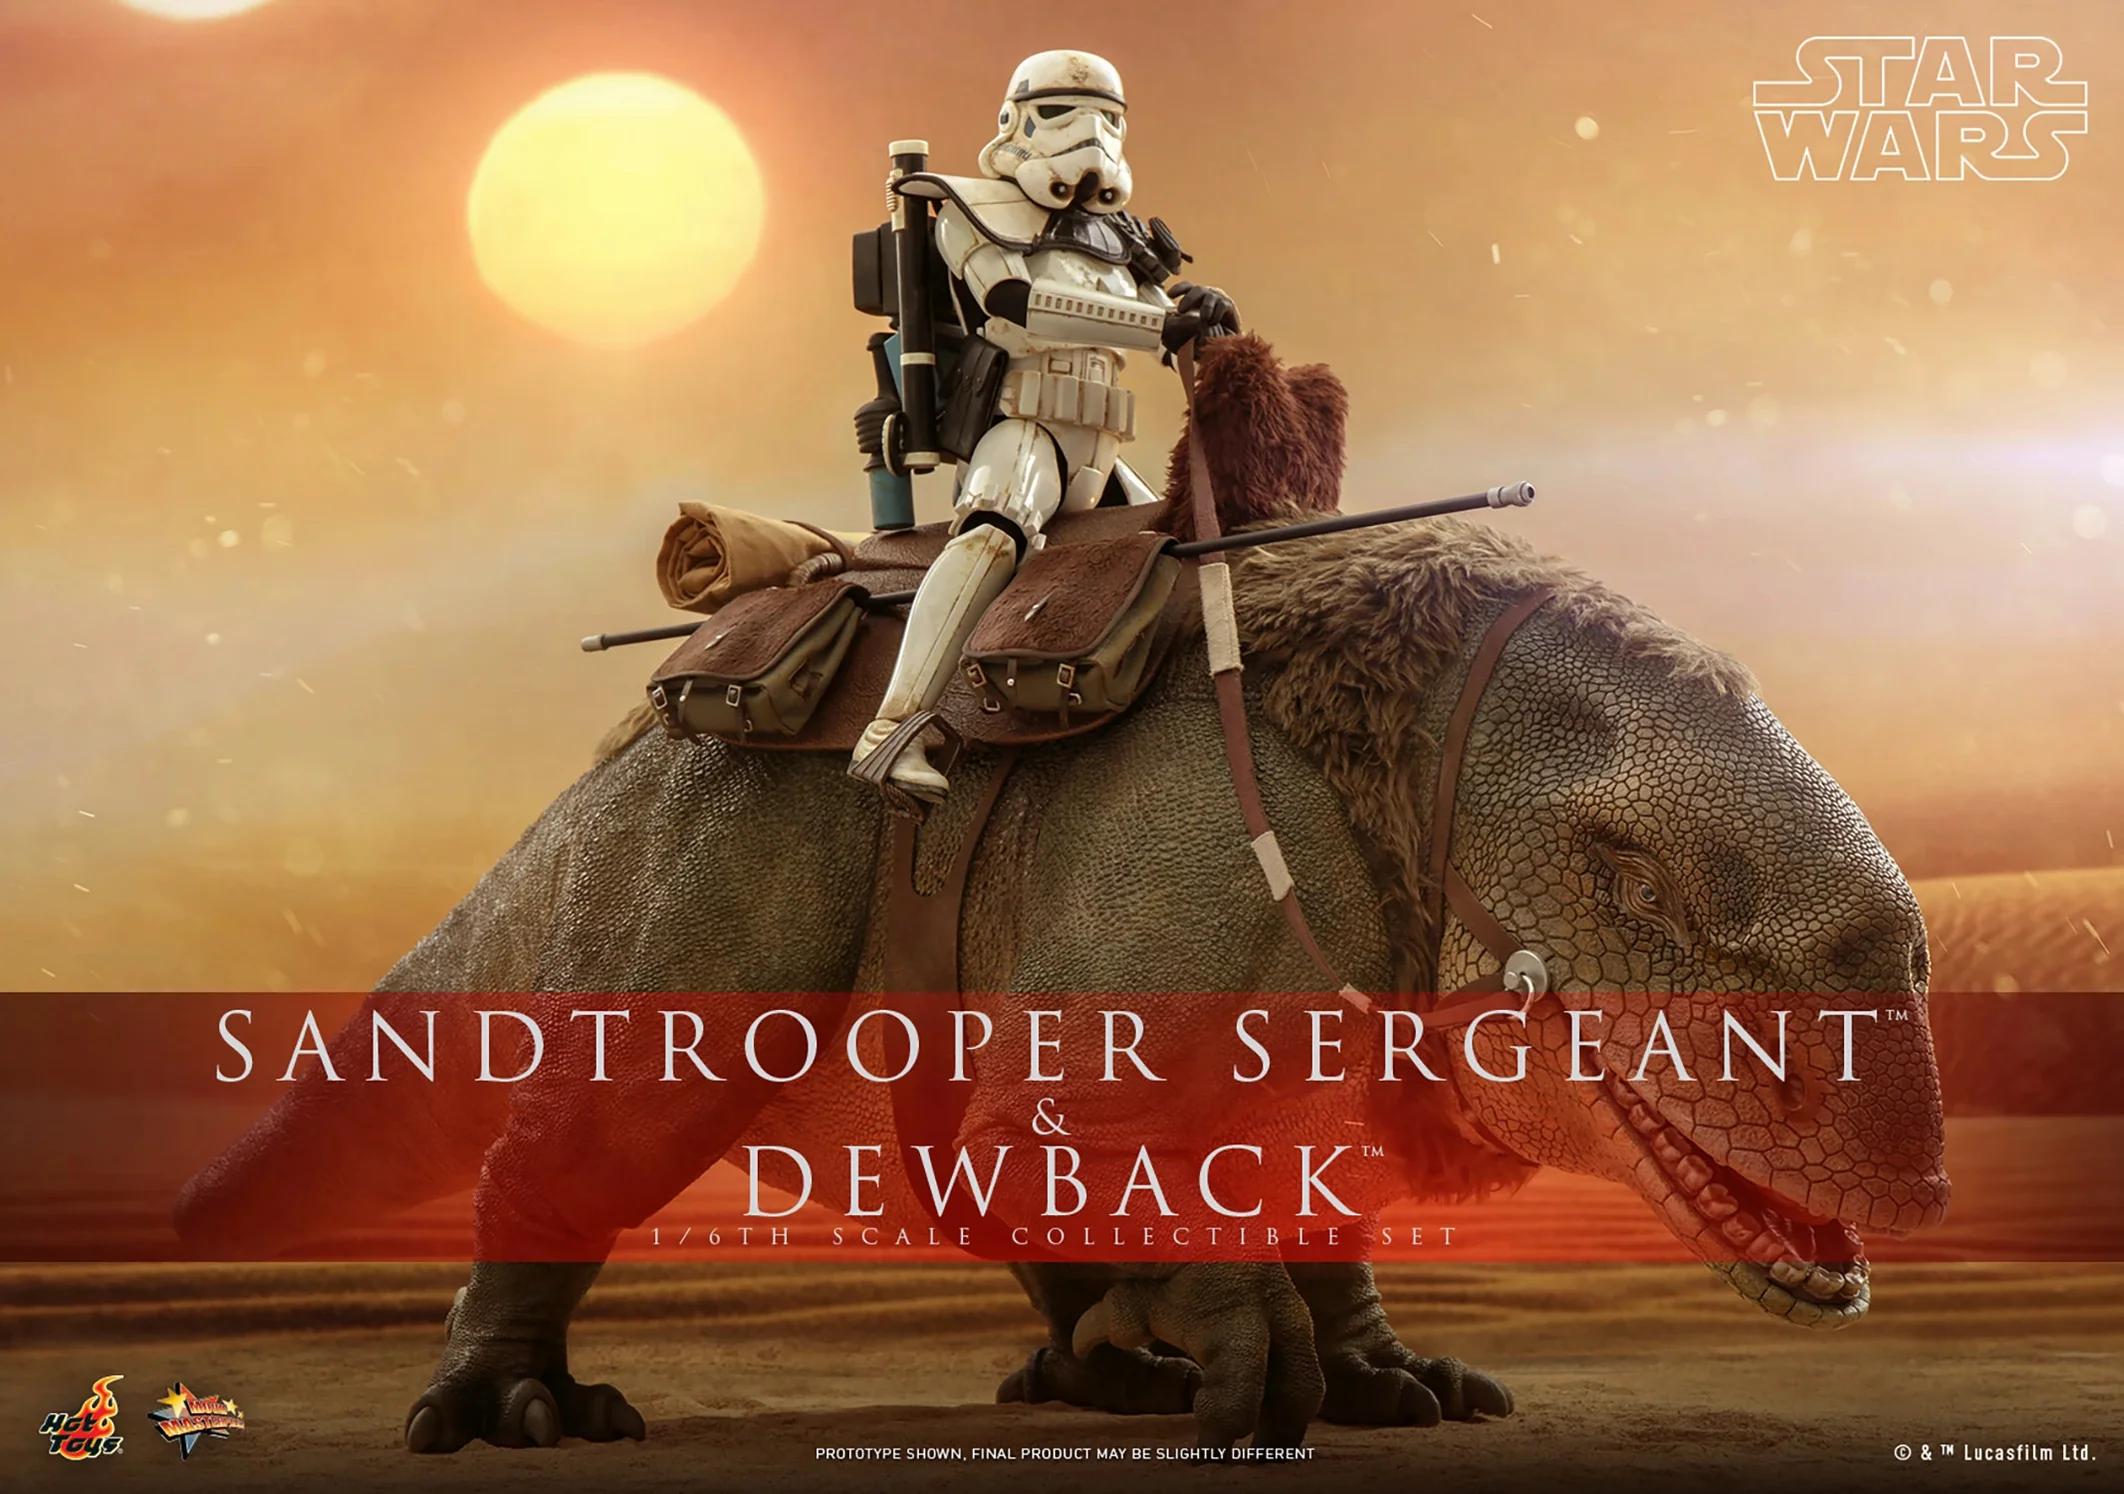 Star Wars A New Hope Sandtrooper Sergeant & Dewback 1/6 Scale 12" Collectible Figure Set